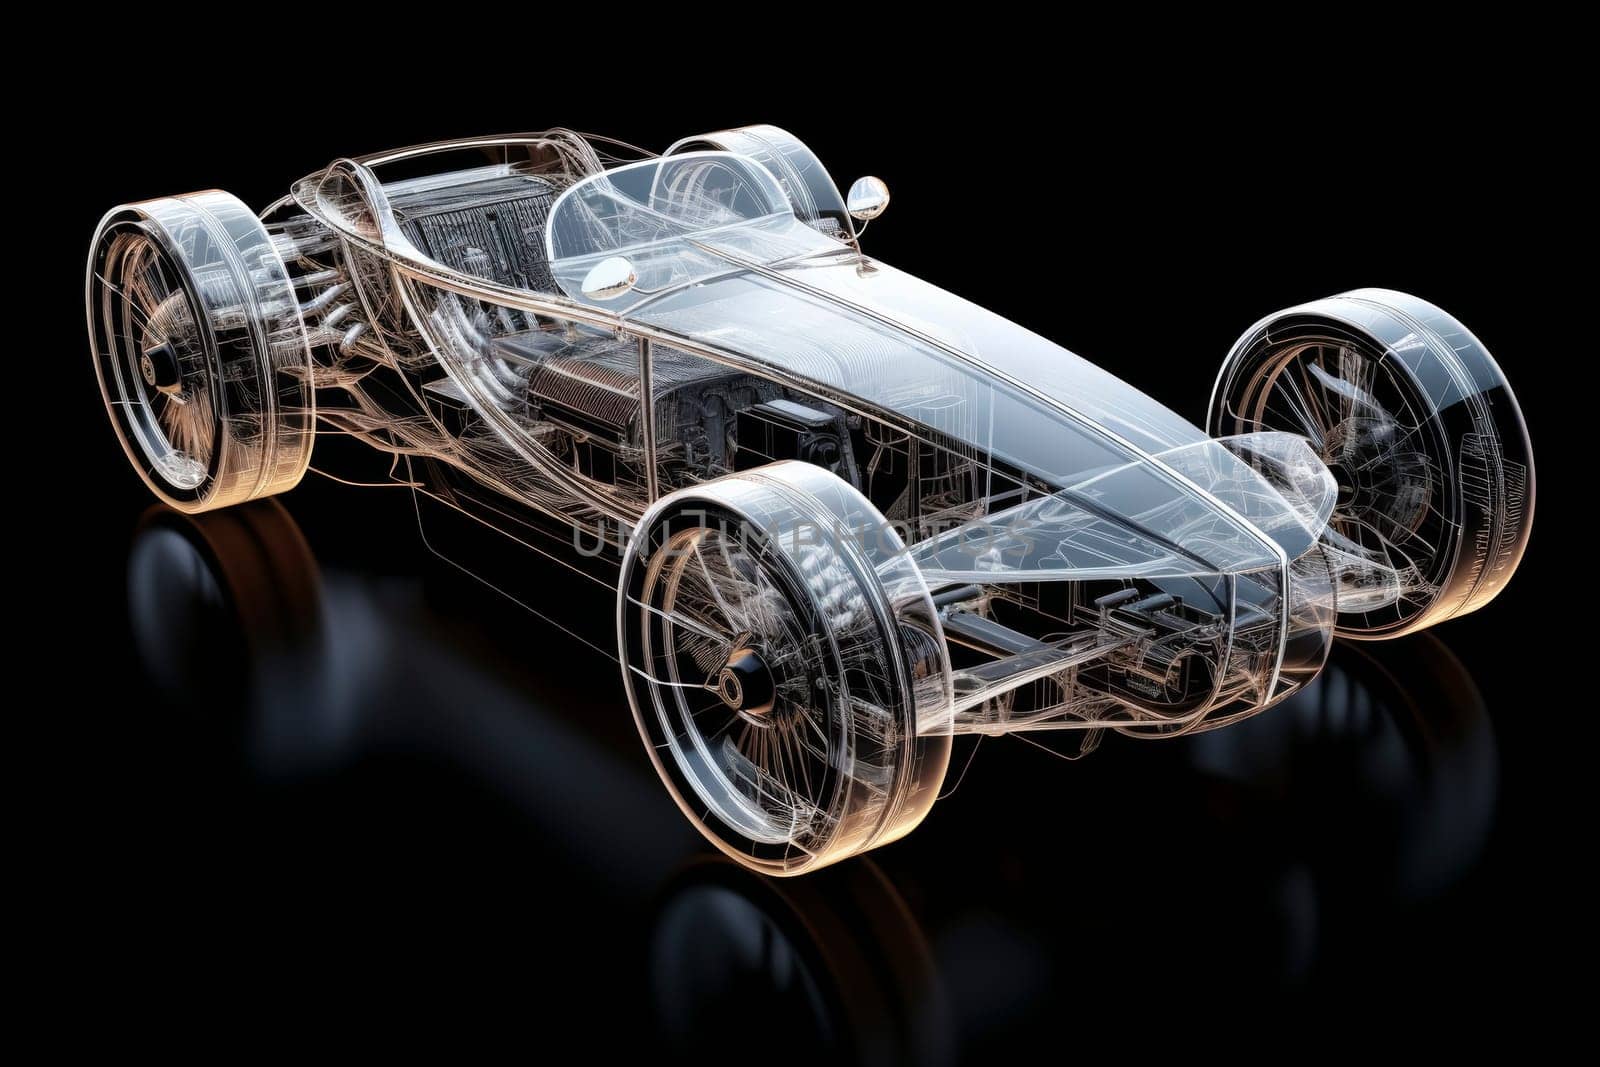 Transparent 3D model of a classic car on a black background. by andreyz